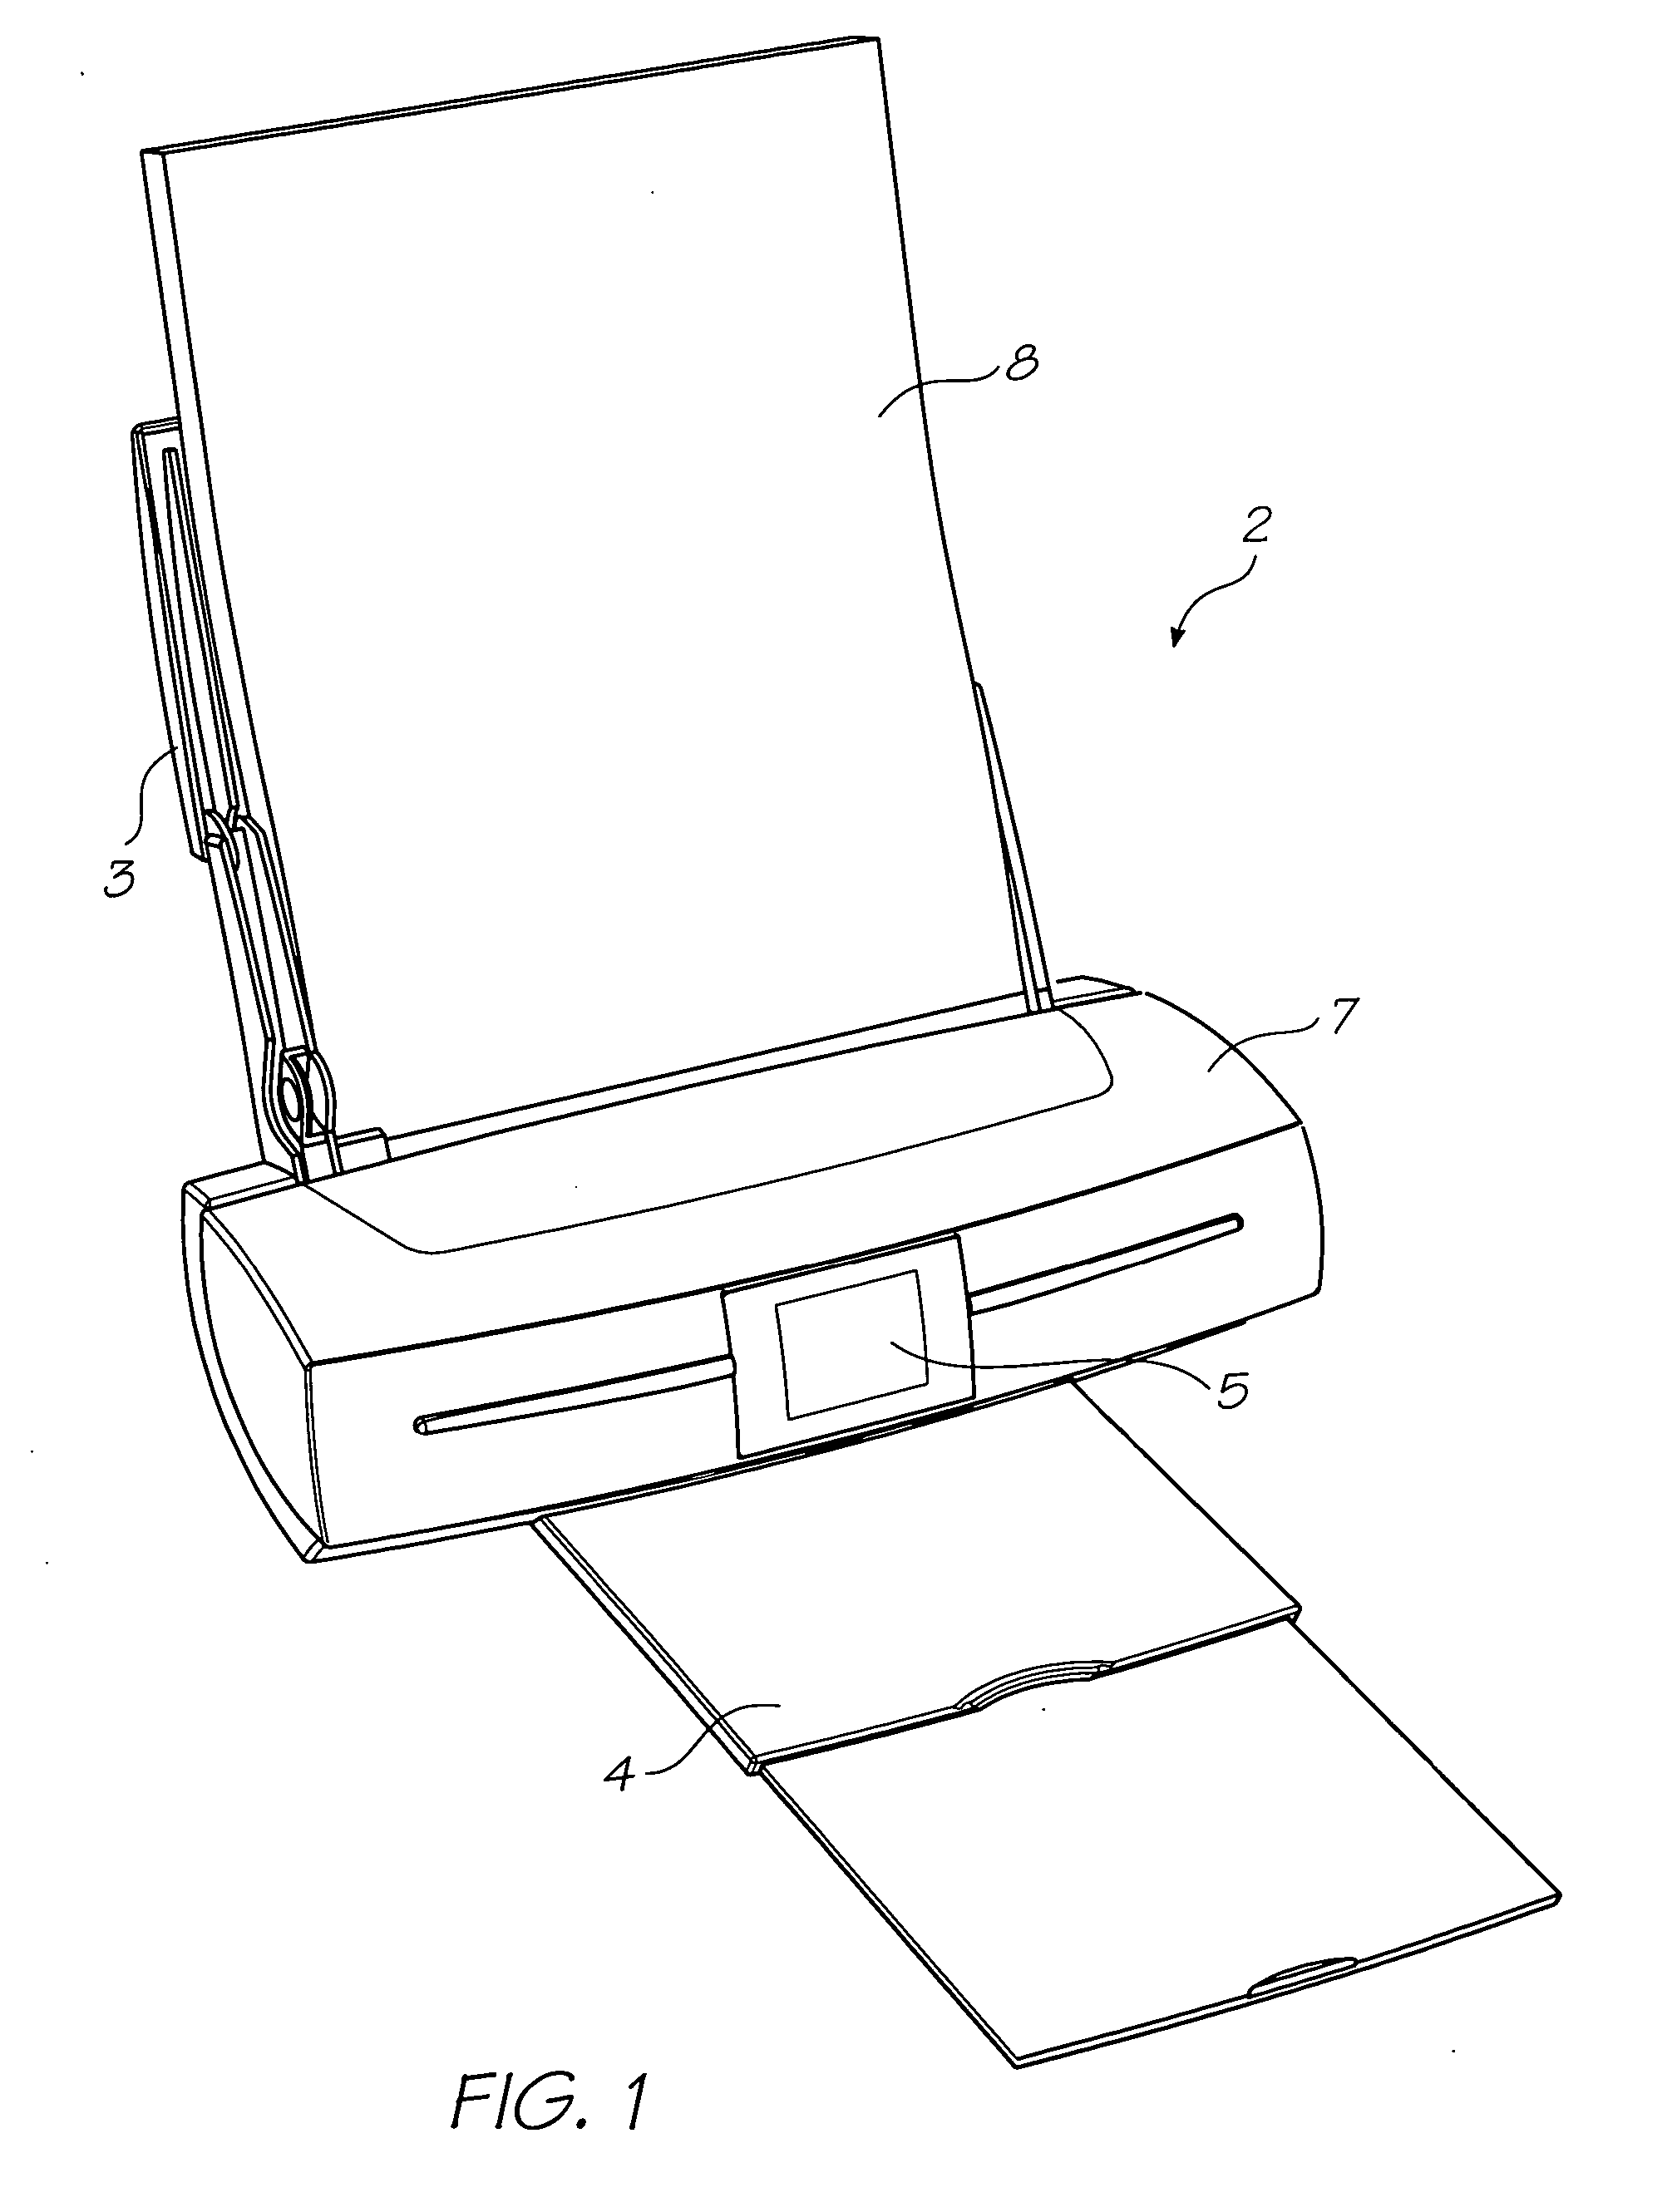 Ink refill unit for docking with an ink cartridge